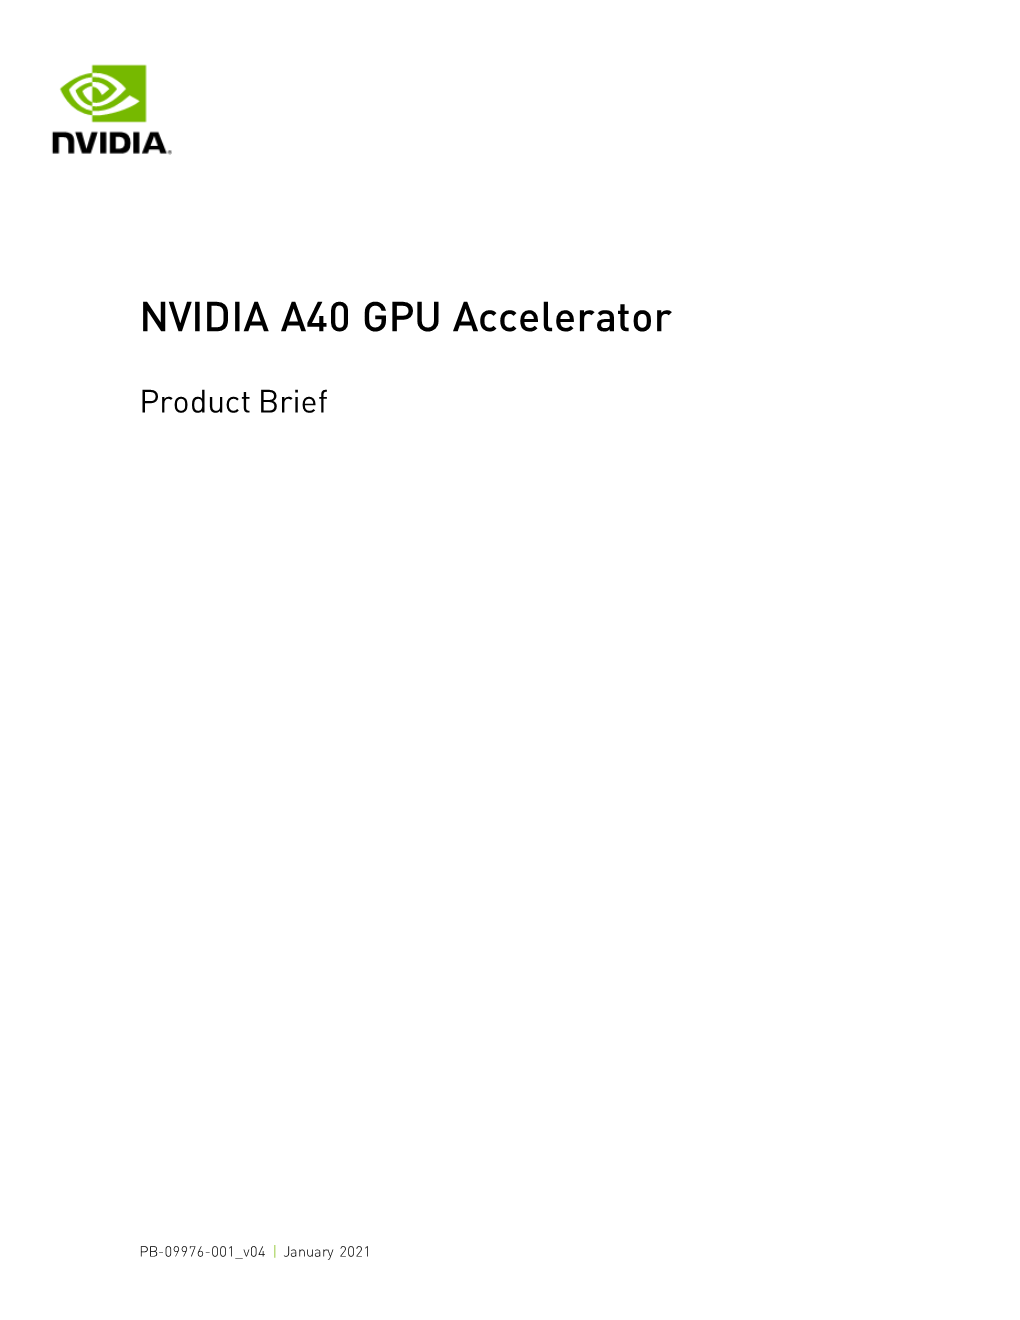 View NVIDIA A40 Product Brief